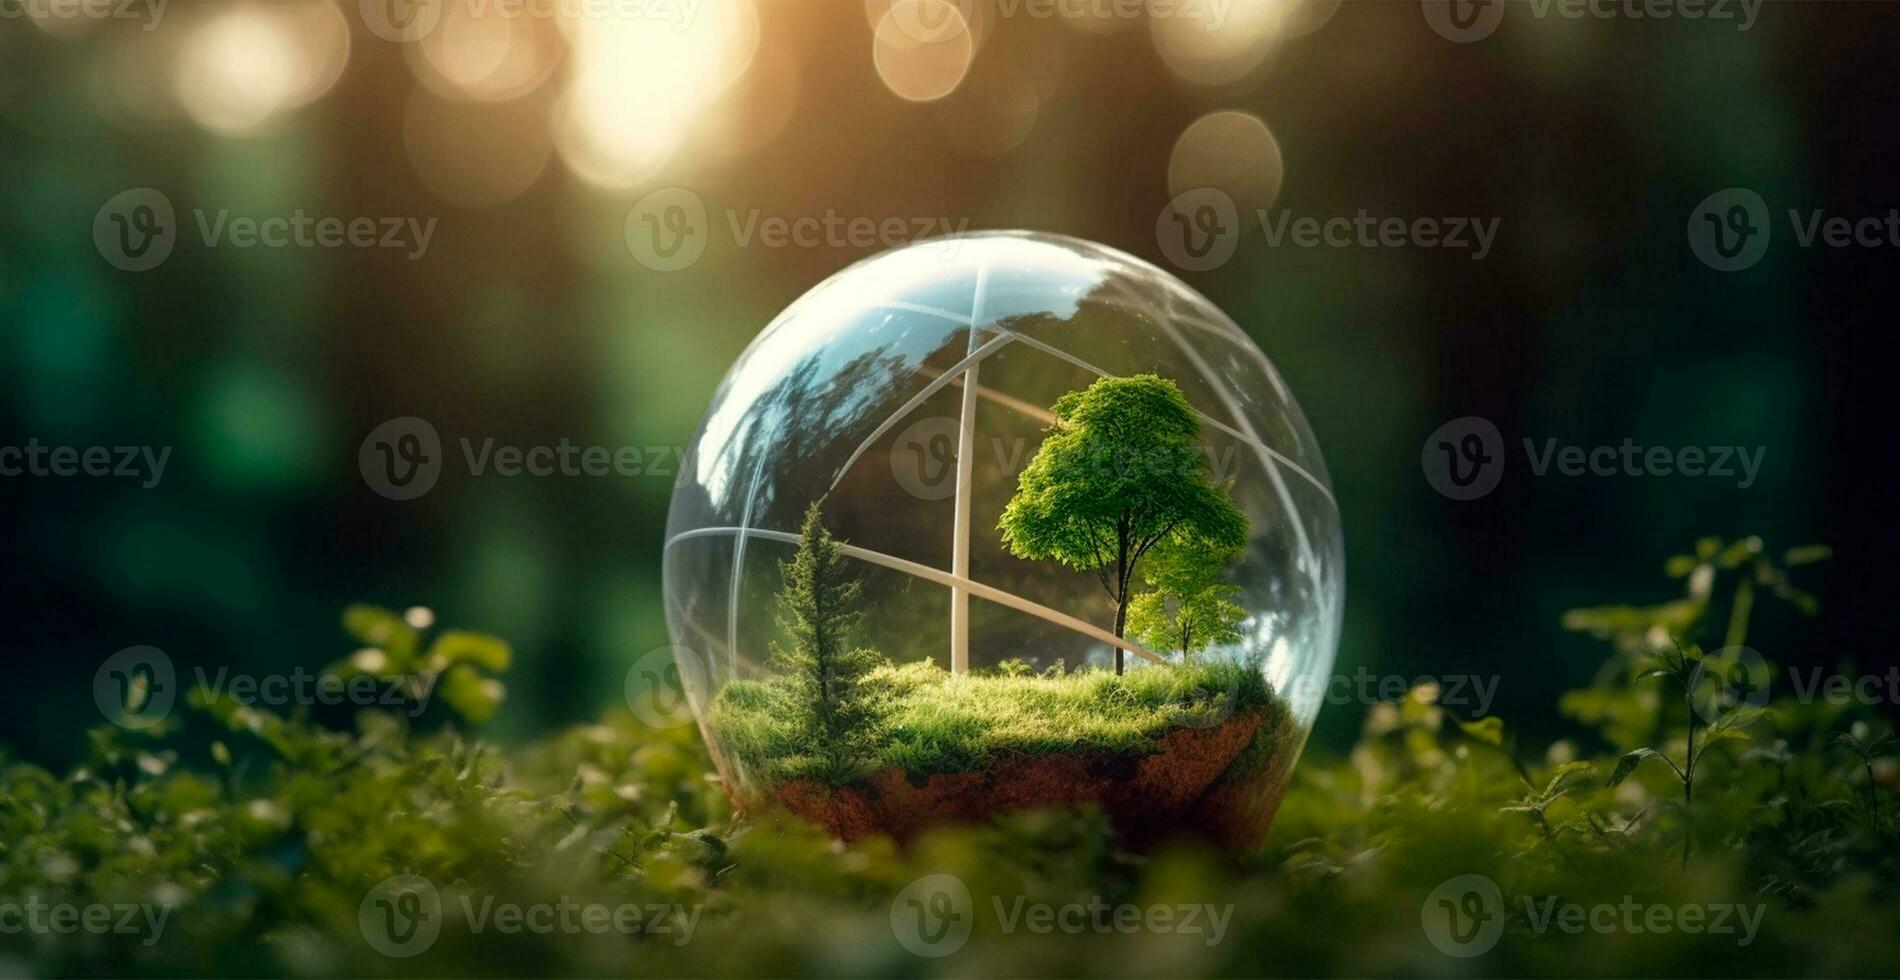 Globe, concern for the environment, Ecosystem, energy saving concert - AI generated image photo